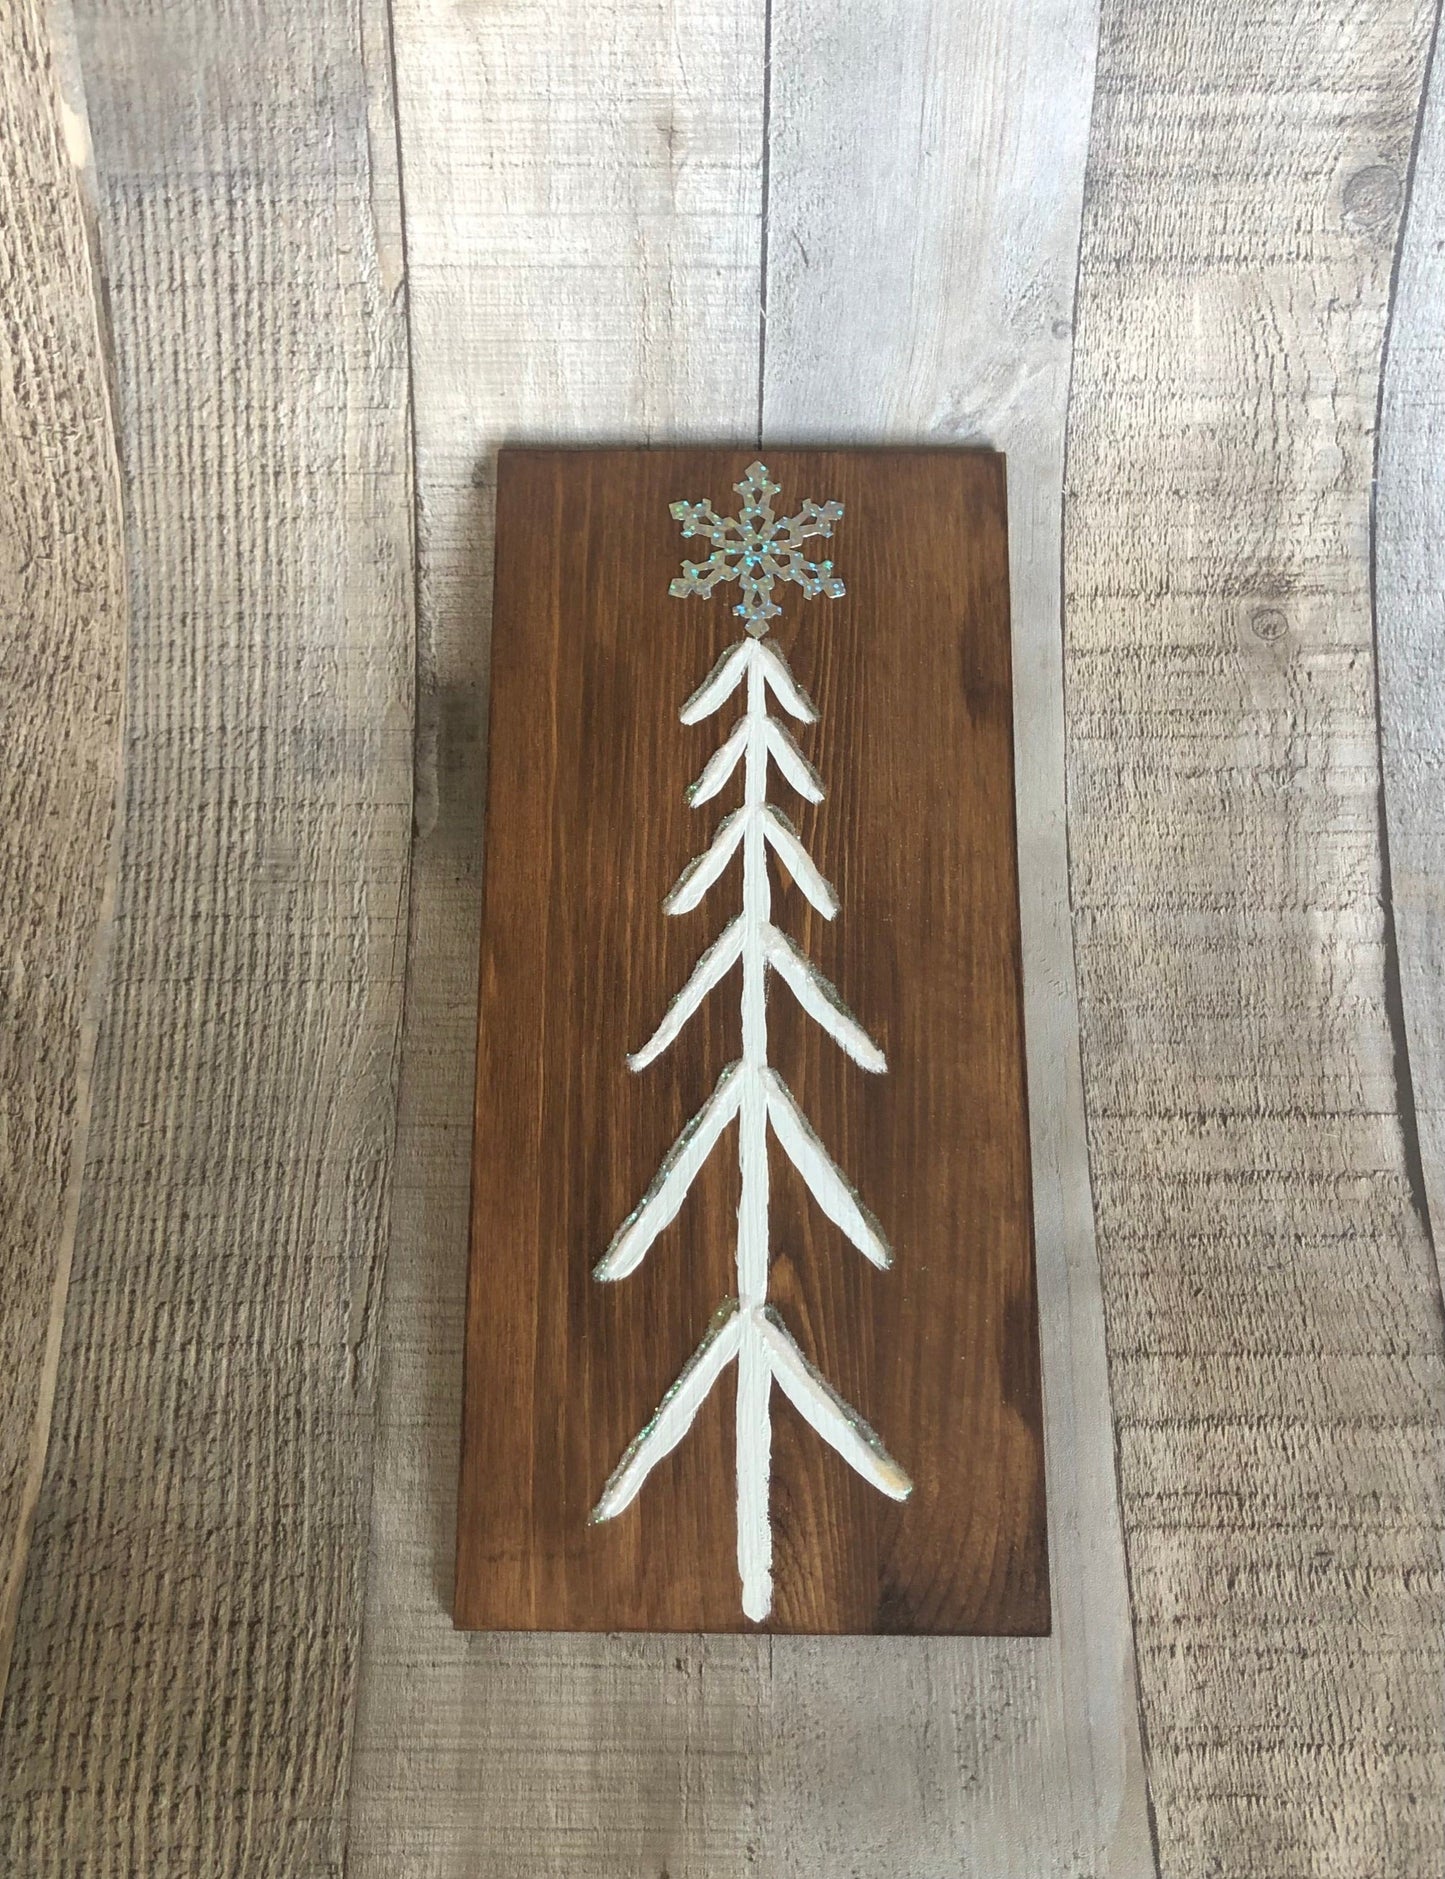 completed craft from Seniorly Creations. primitive winter tree painted on pine board.